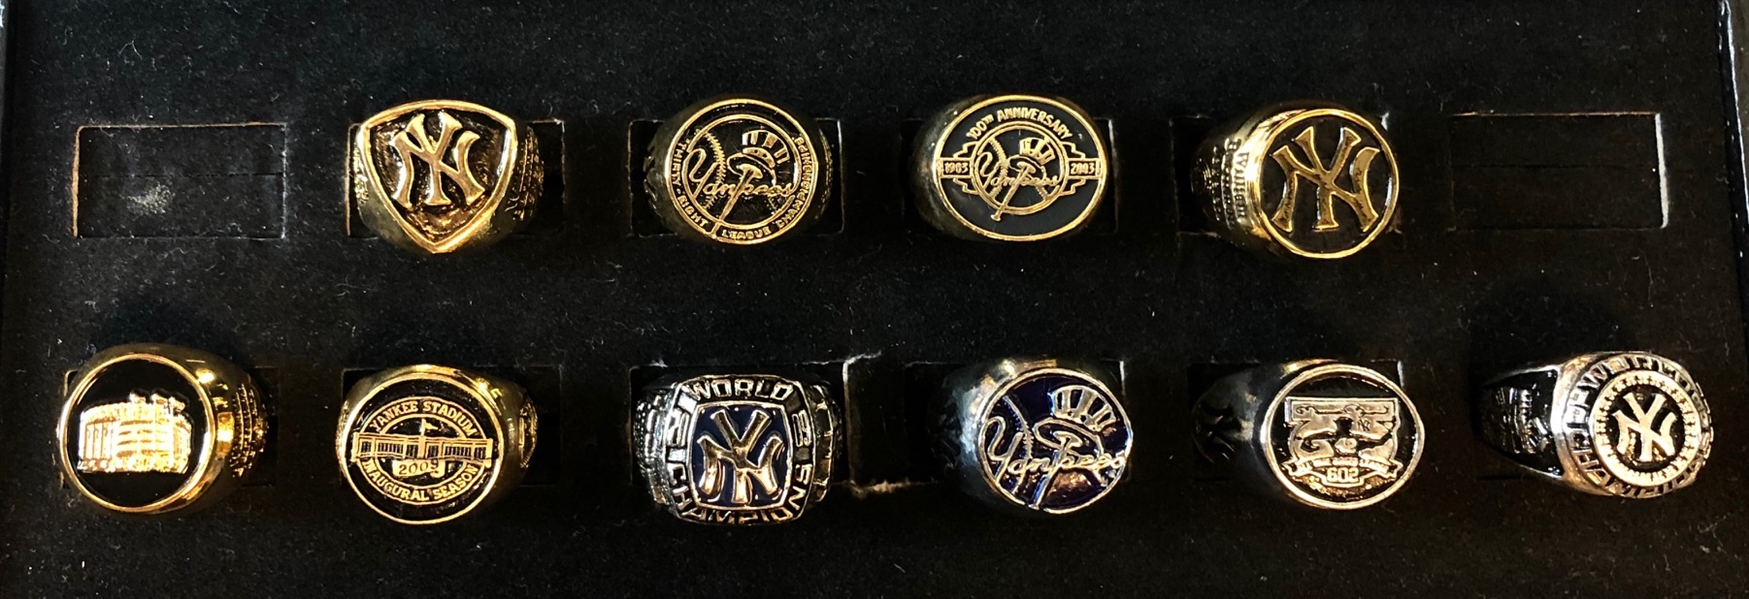 10 New York Yankee Fan Day rings. All size 8. Ring leatherette display box included